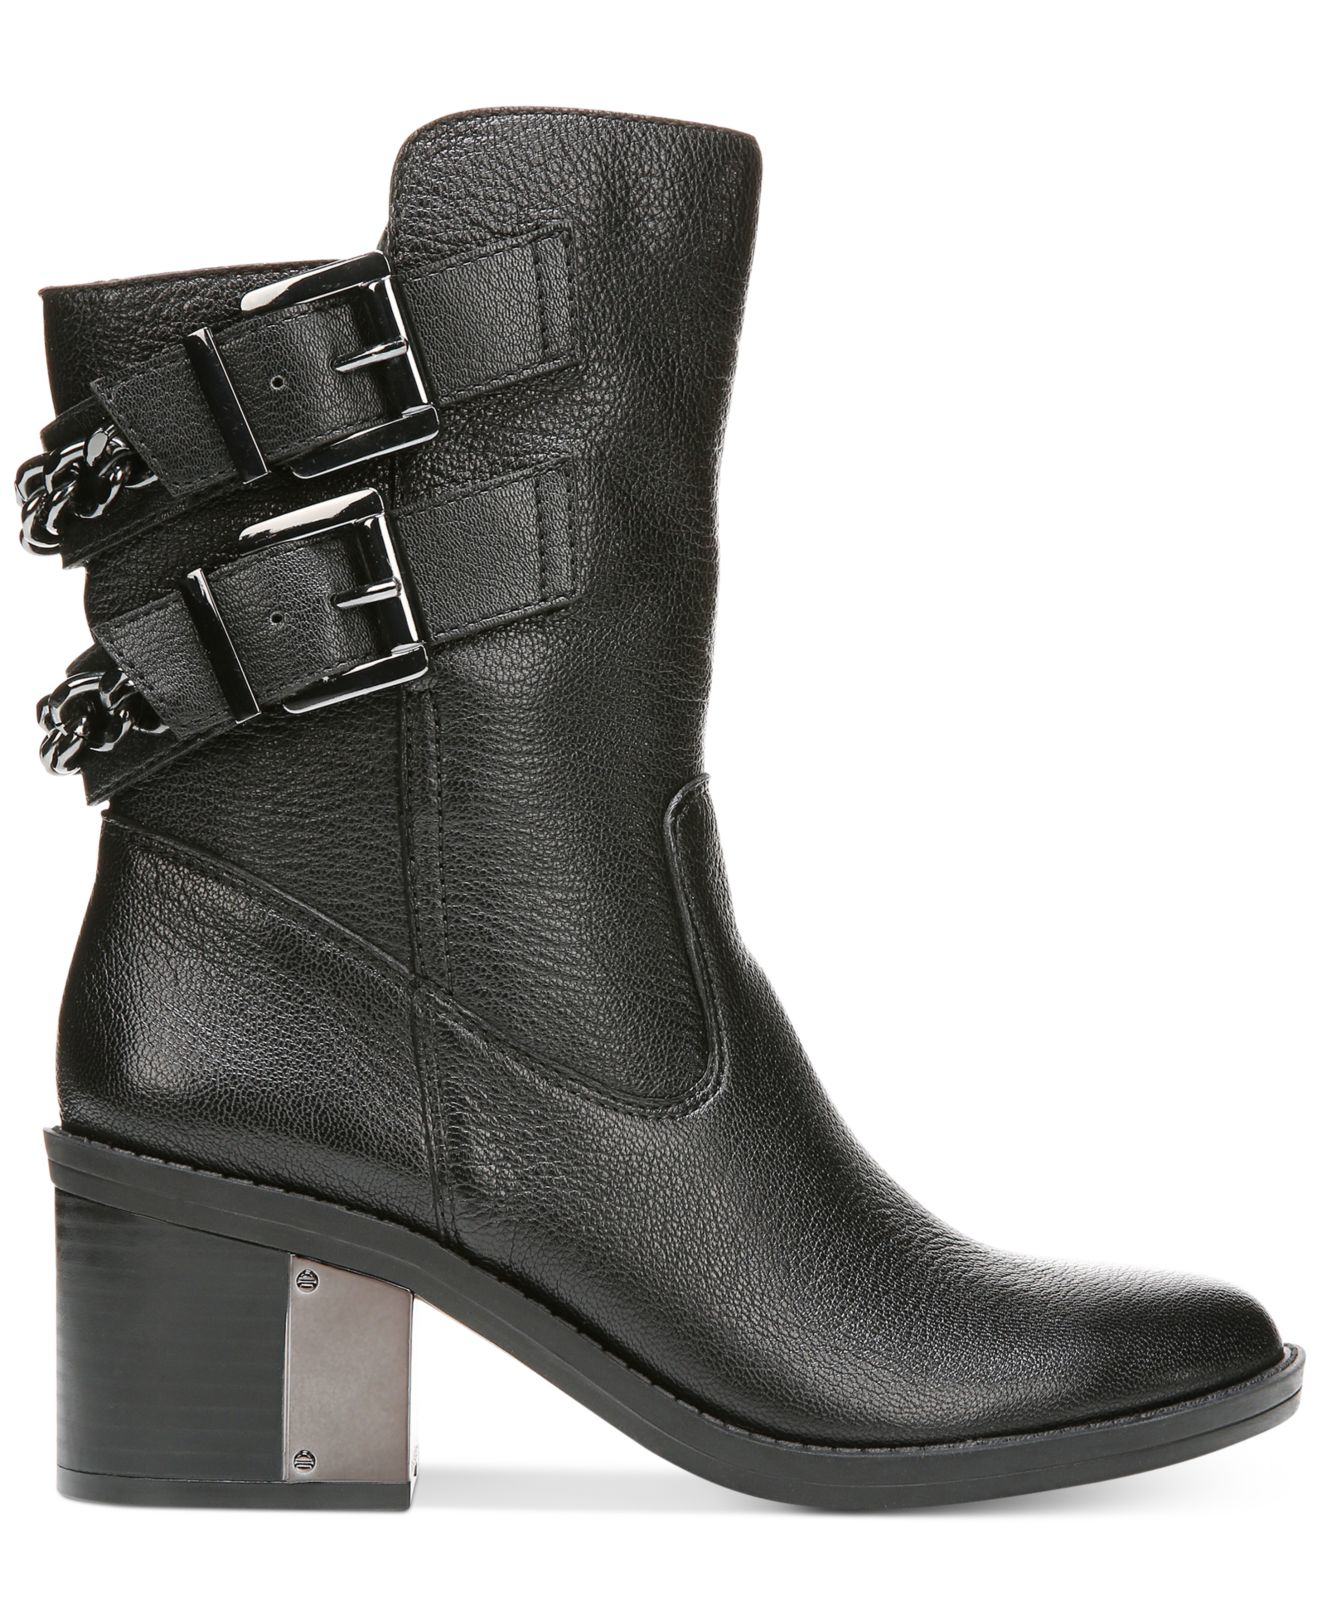 Fergie Wistful Leather Ankle Boots in Black | Lyst